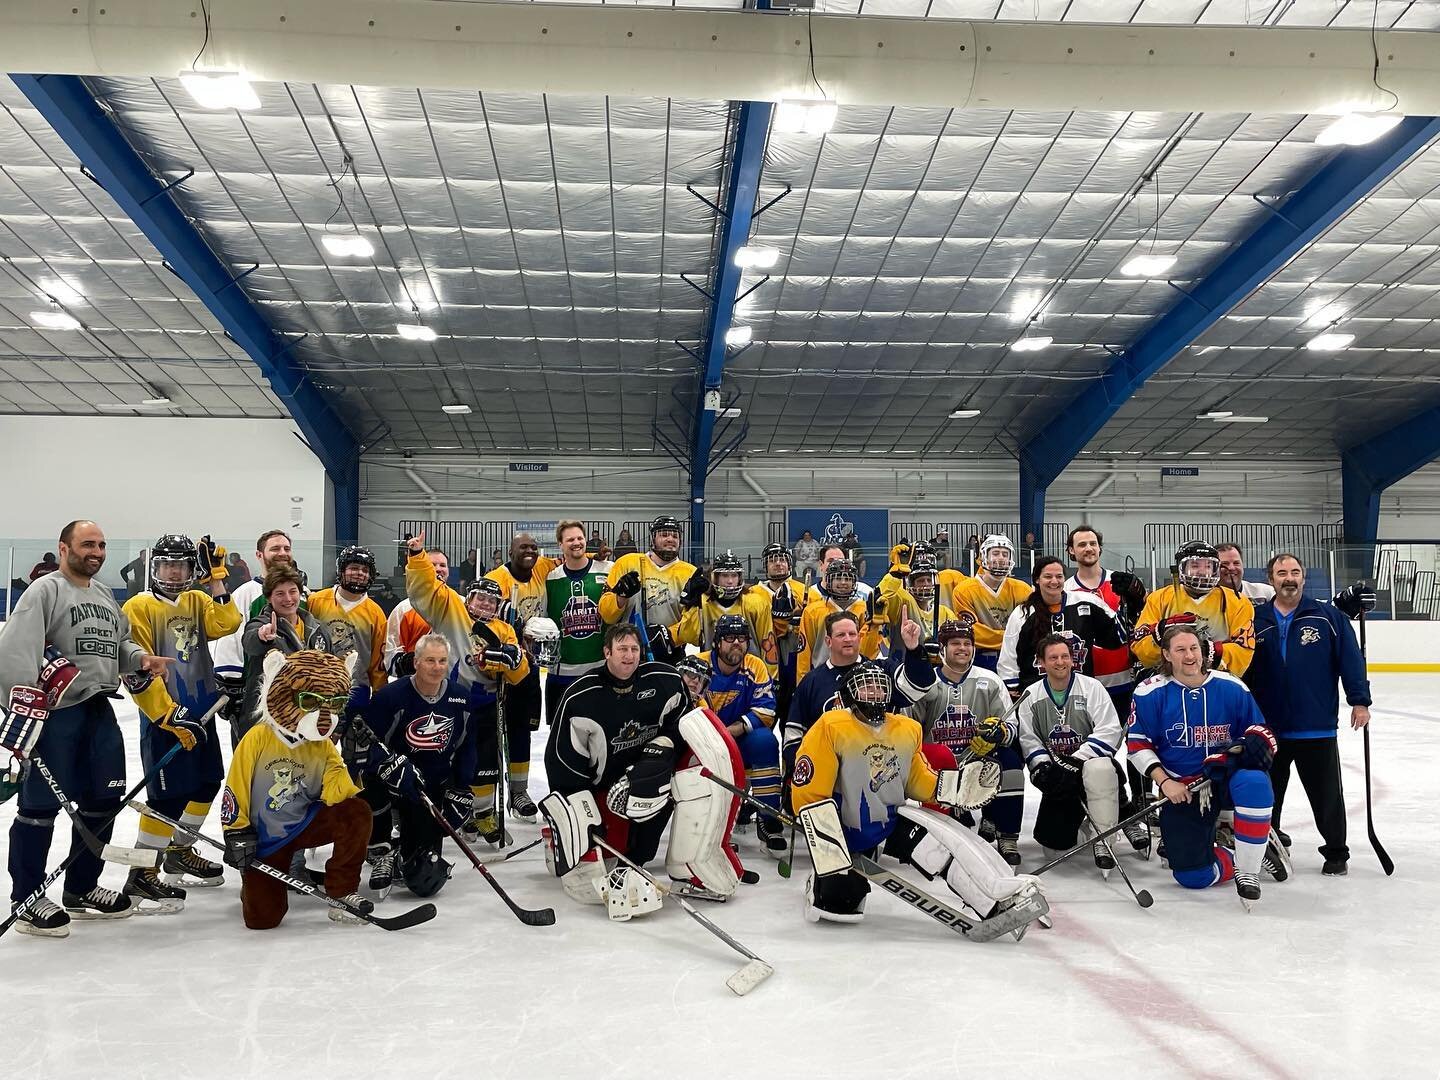 This past weekend I was invited to the 4th Annual International @hpiborg Charity Hockey Tournament in Cleveland. It was truly an honor to support @americanspecialhockey . Go Team Yellow! 💛🏒

#HPIB #hockey #charity #ASHA #business #giveback #support